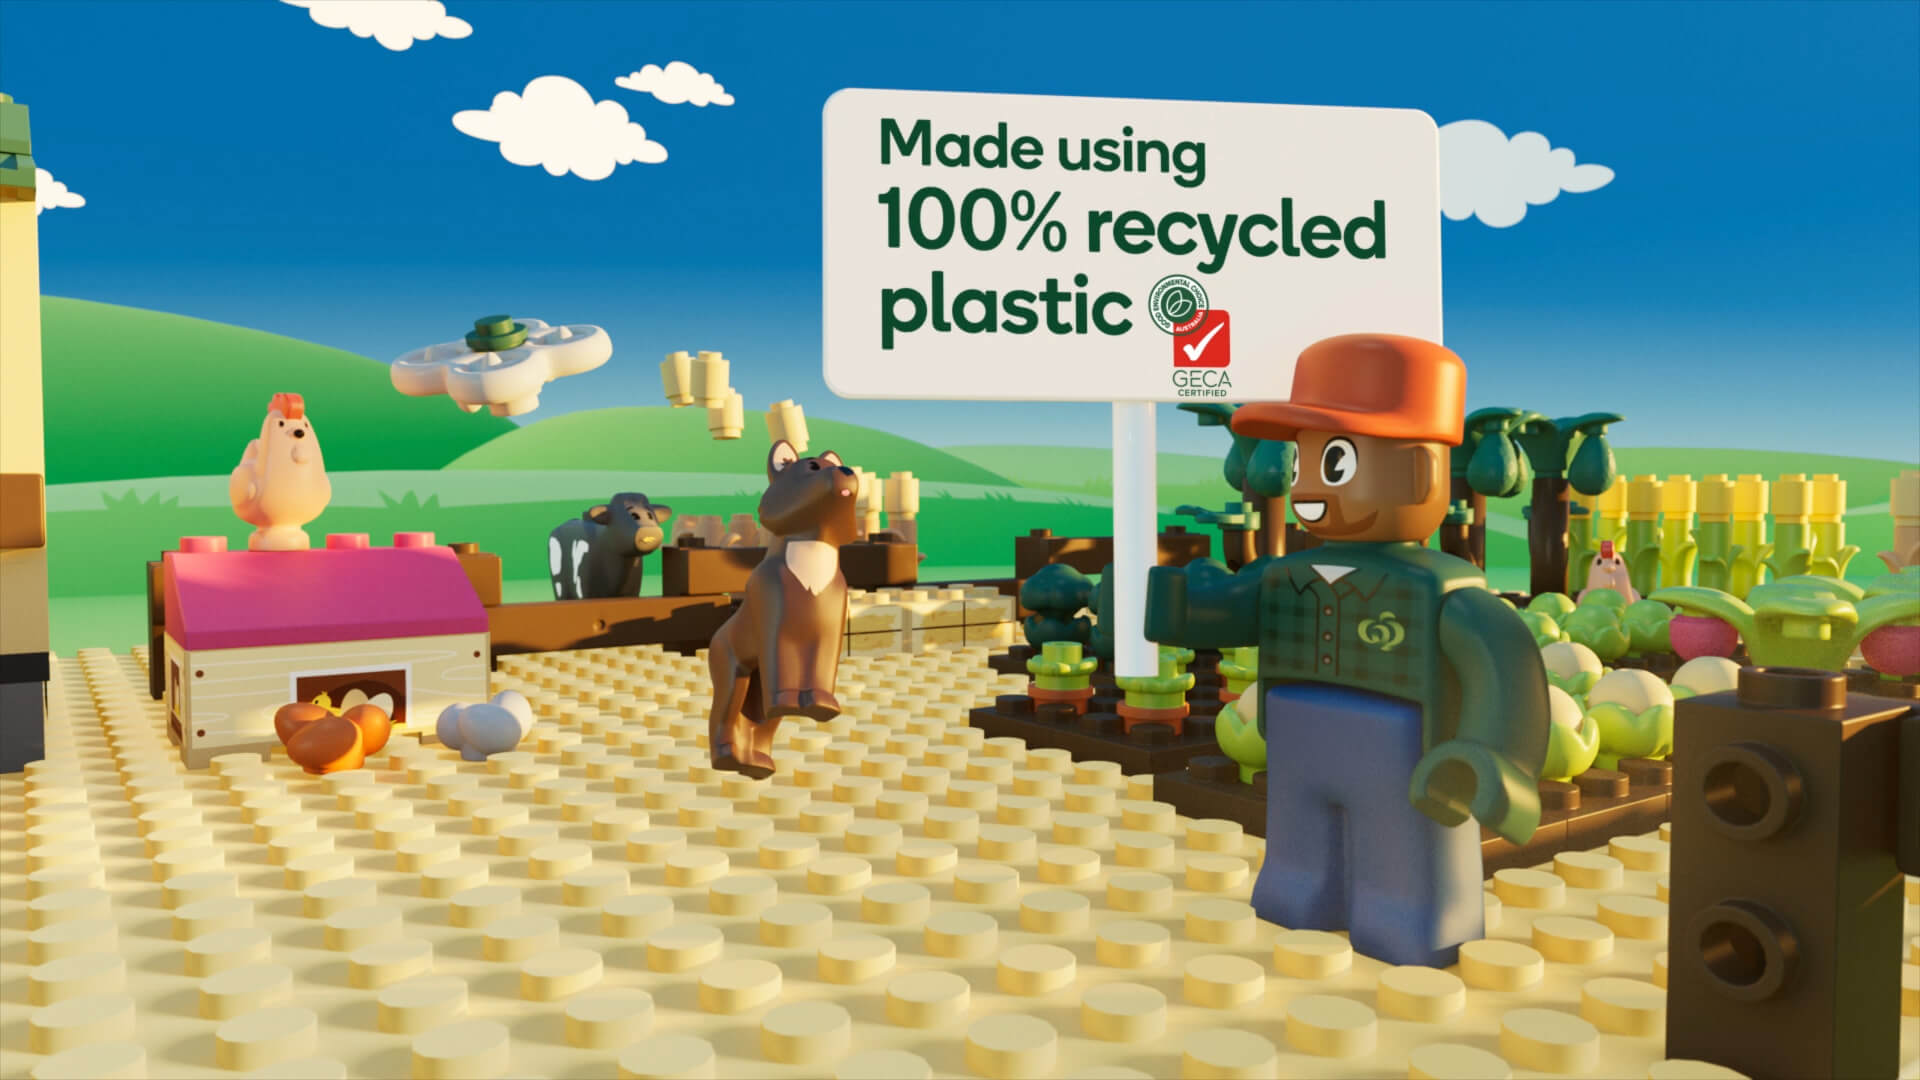 Image showing Woolworths Bricks Farm motion graphics animation frame with text saying it's made from 100% recycled plastic